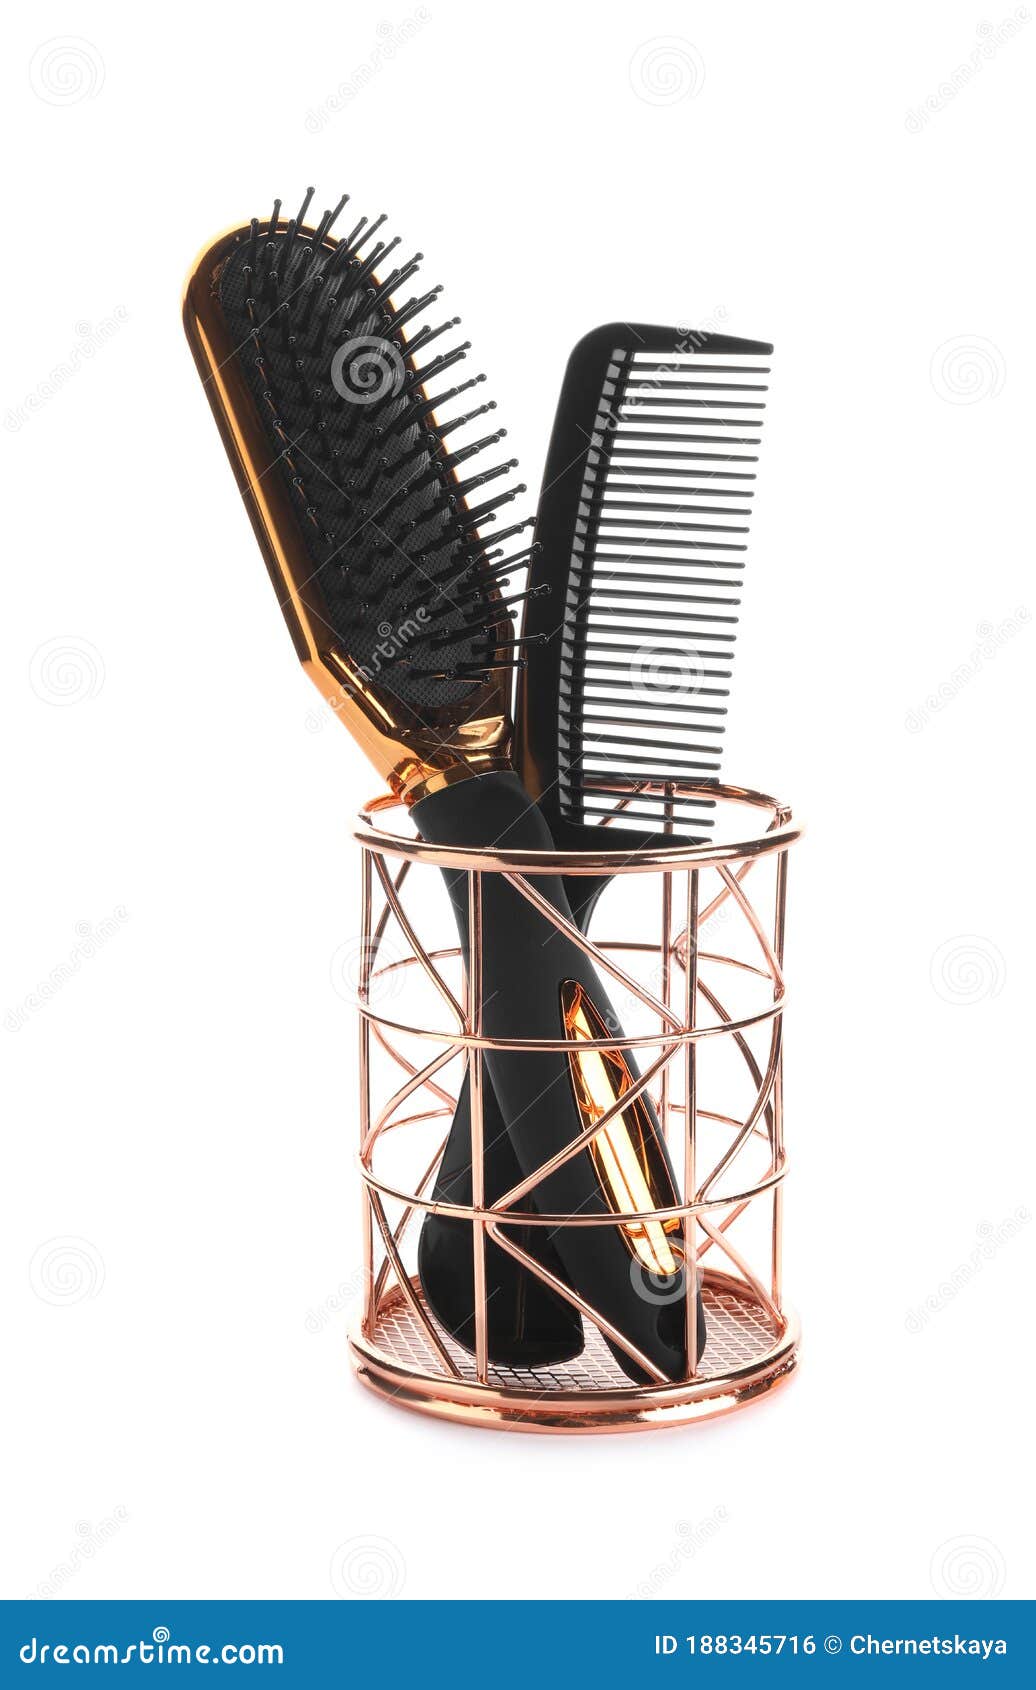 New Modern Hair Brush and Comb in Metal Holder Isolated Stock Photo - Image  of comb, lifestyle: 188345716